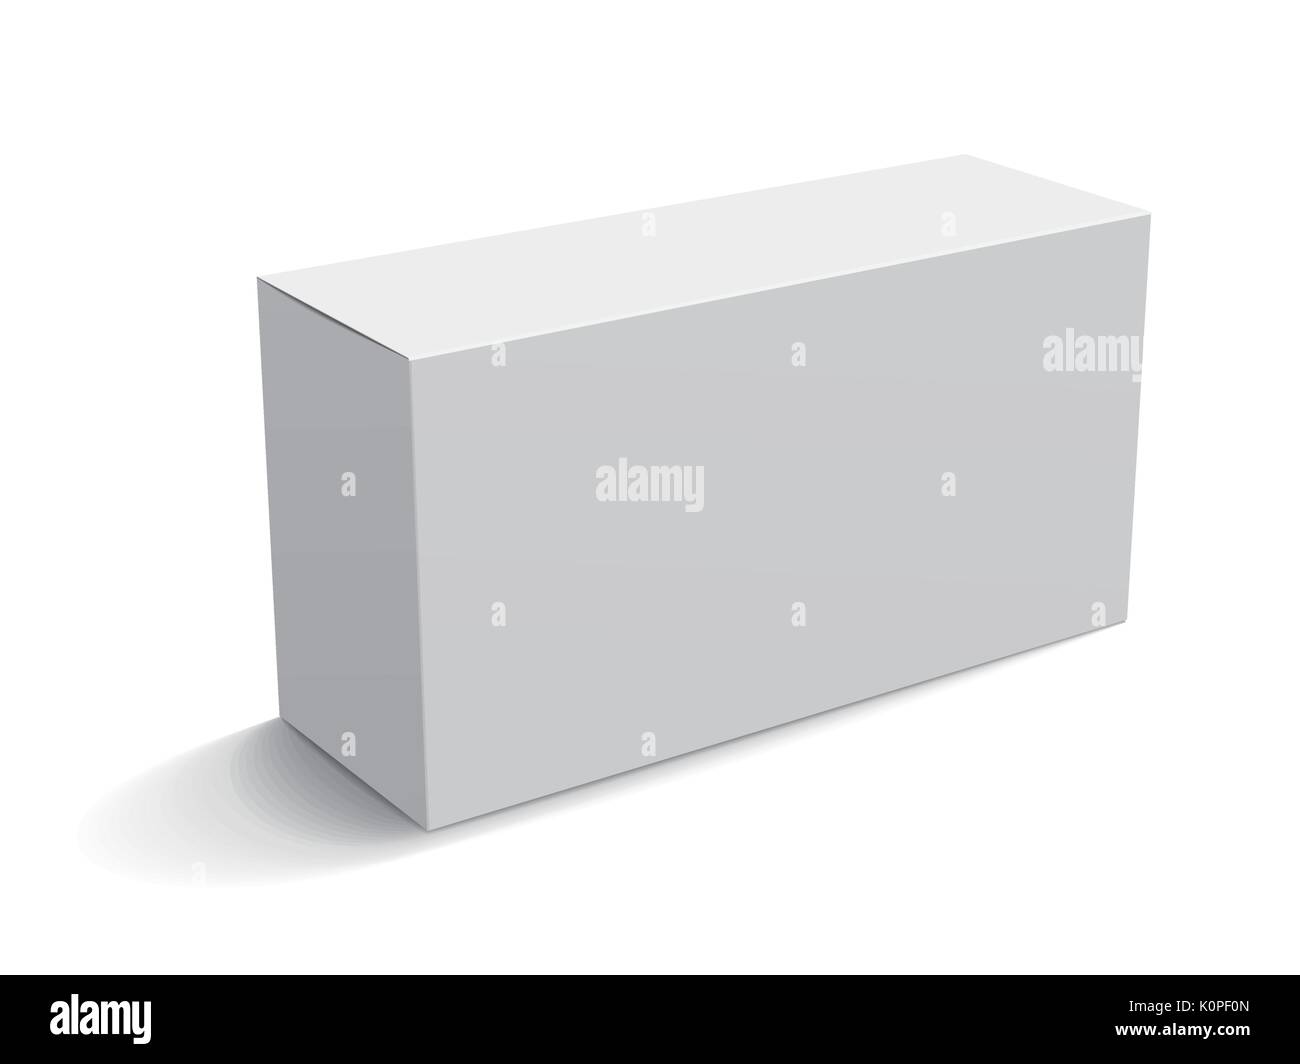 Download Blank Paper Box Mockup White Box Template For Design Uses In 3d Illustration Elevated View Stock Vector Image Art Alamy